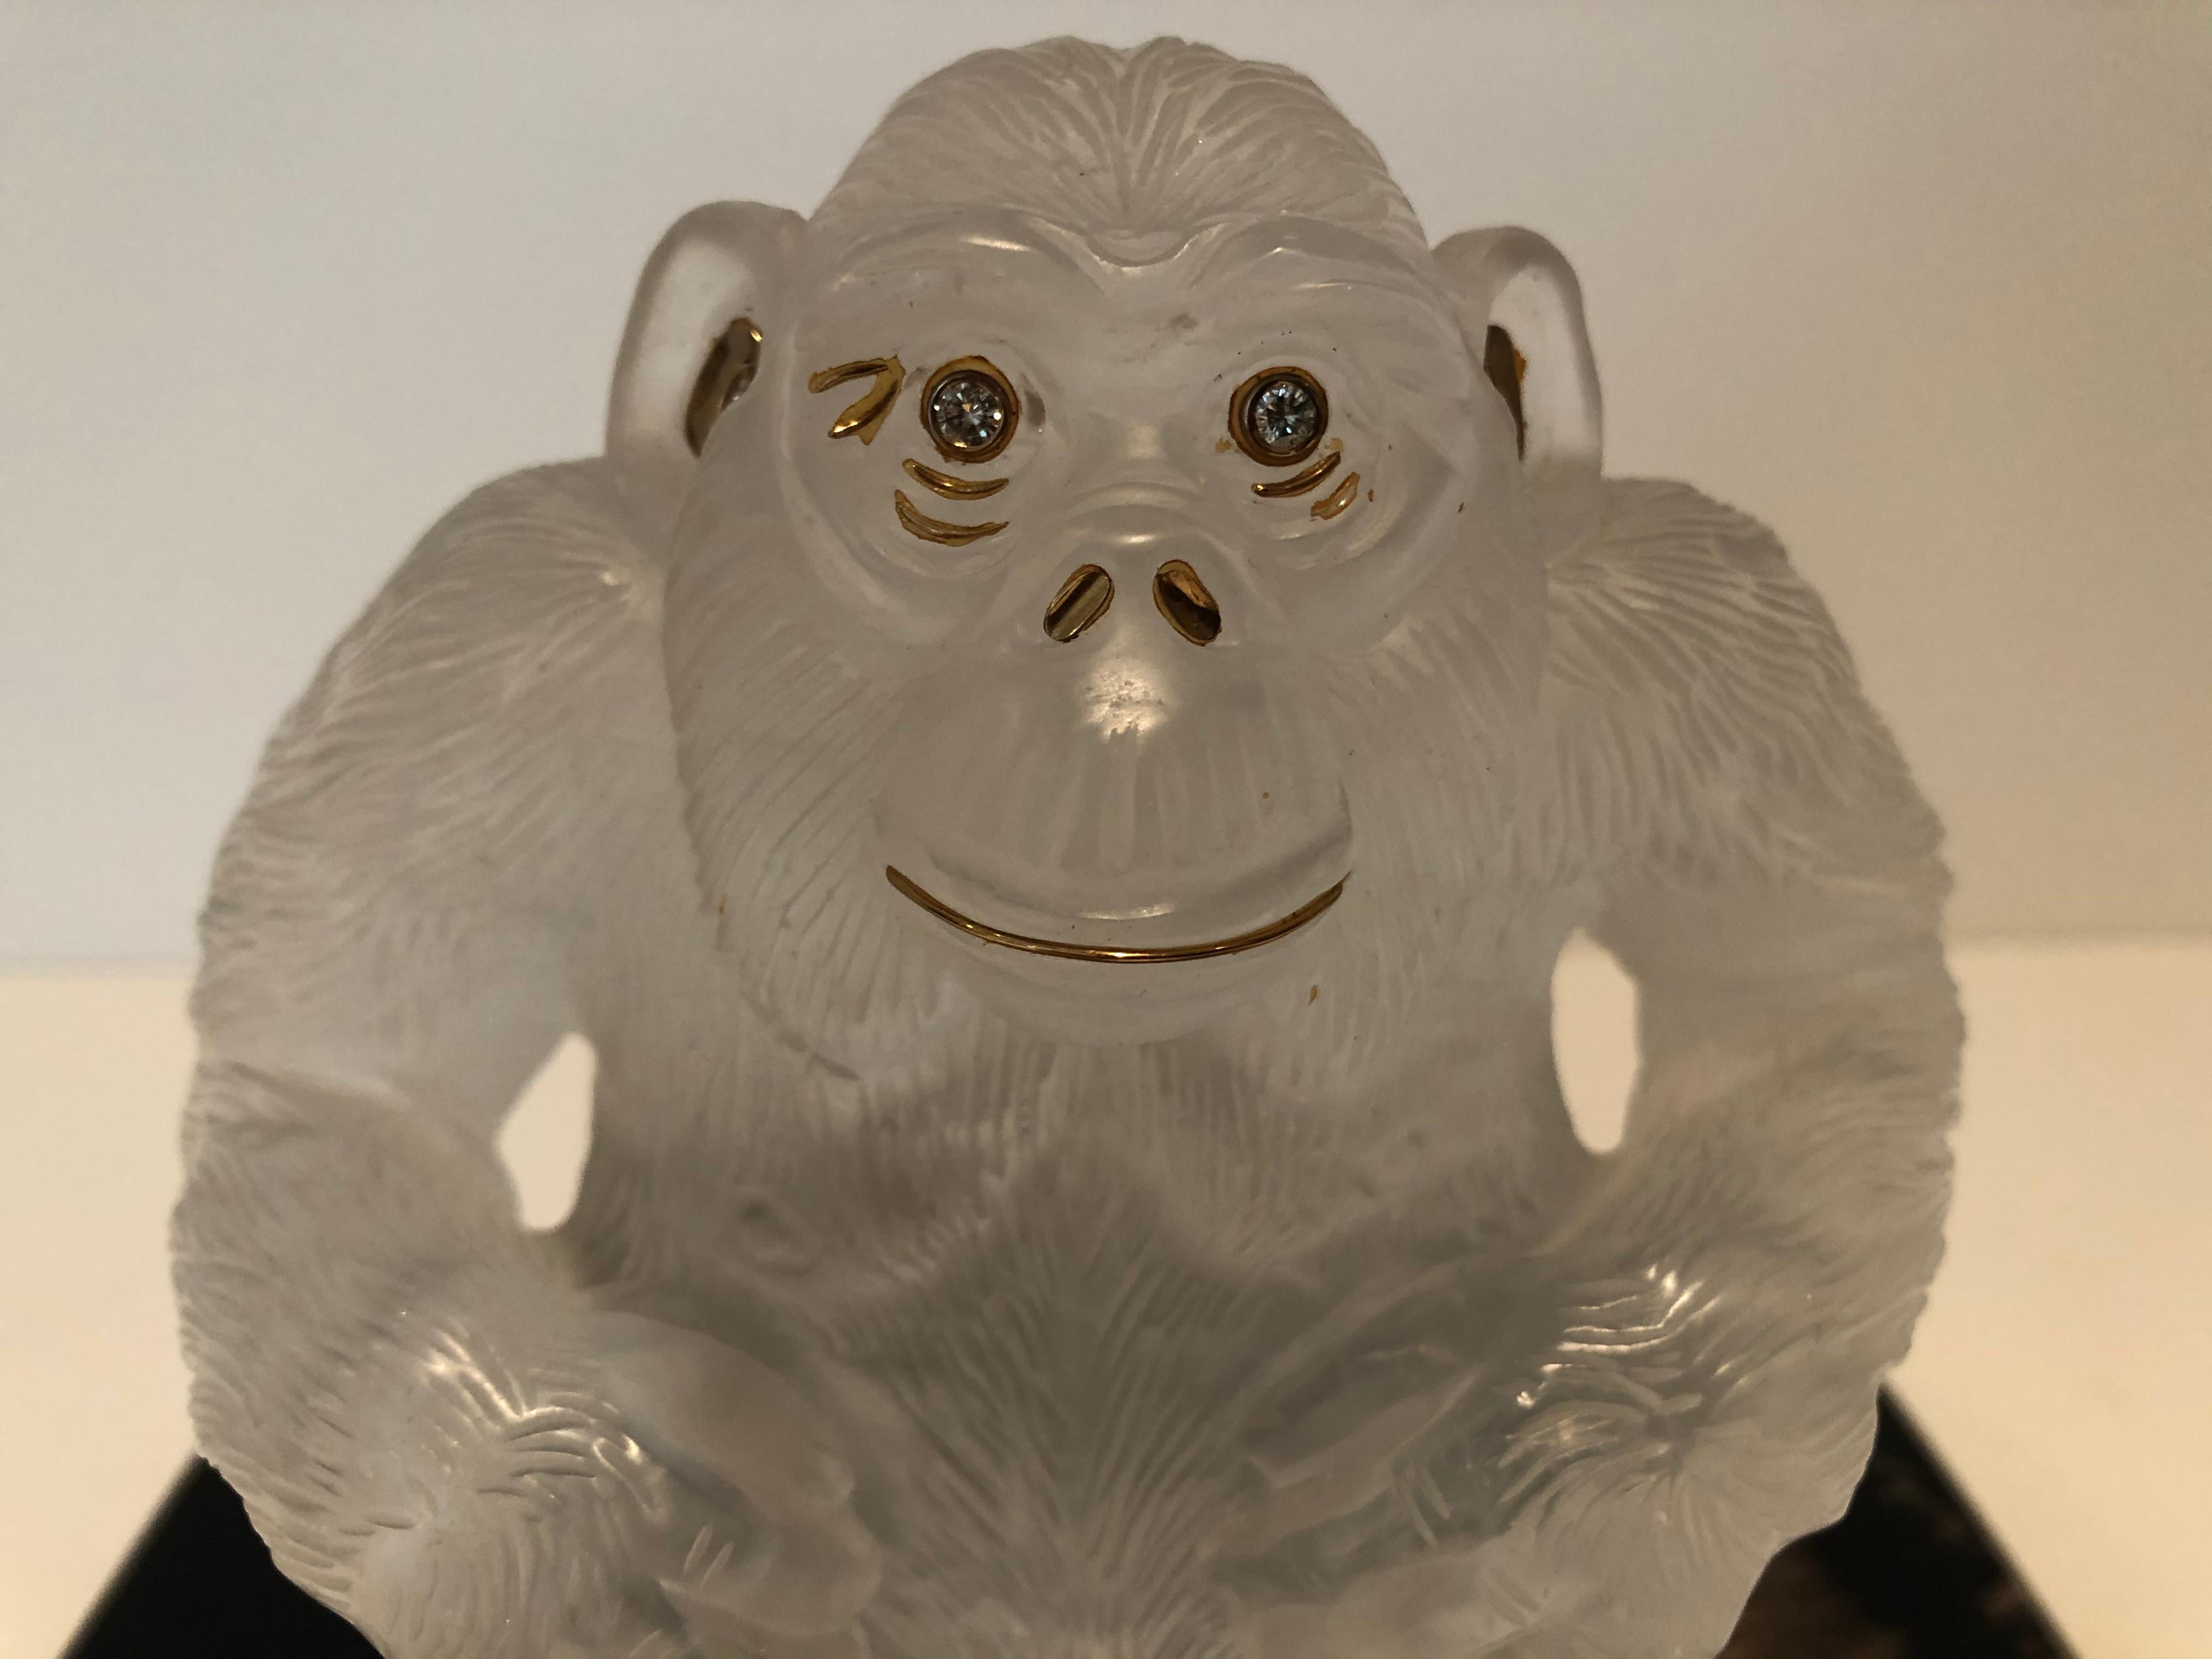 20th Century Asprey Carved Rock Crystal Gorilla Diamond Eye's and 18-Karat Gold Accents For Sale